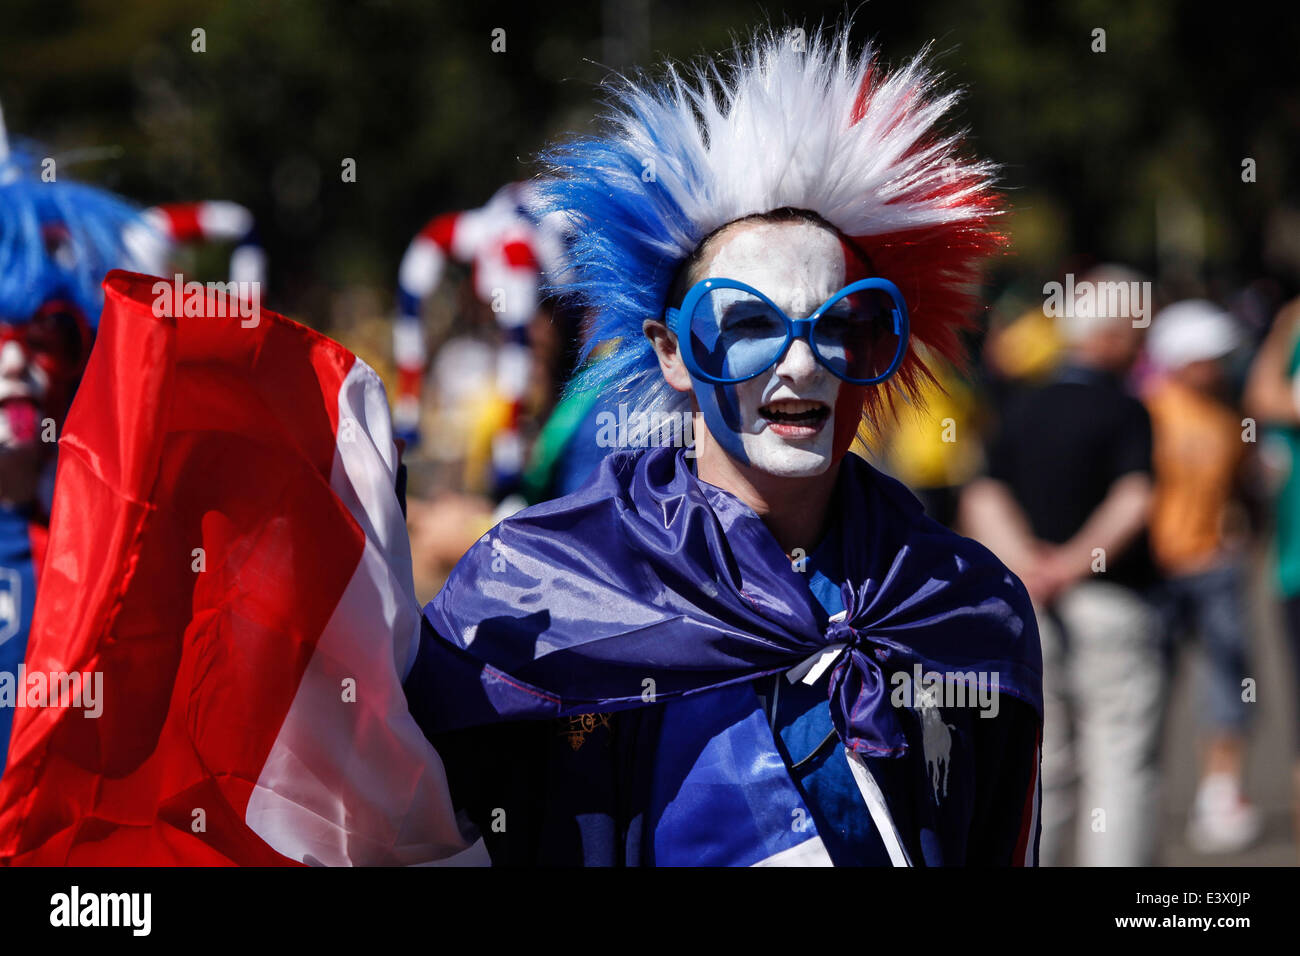 Brasilia, Brazil. 30th June, 2014. A France's fan is seen outside the Estadio Nacional Stadium in Brasilia, Brazil, on June 30, 2014, ahead of a Round of 16 match between France and Nigeria of 2014 FIFA World Cup. © Jhon Paz/Xinhua/Alamy Live News Stock Photo